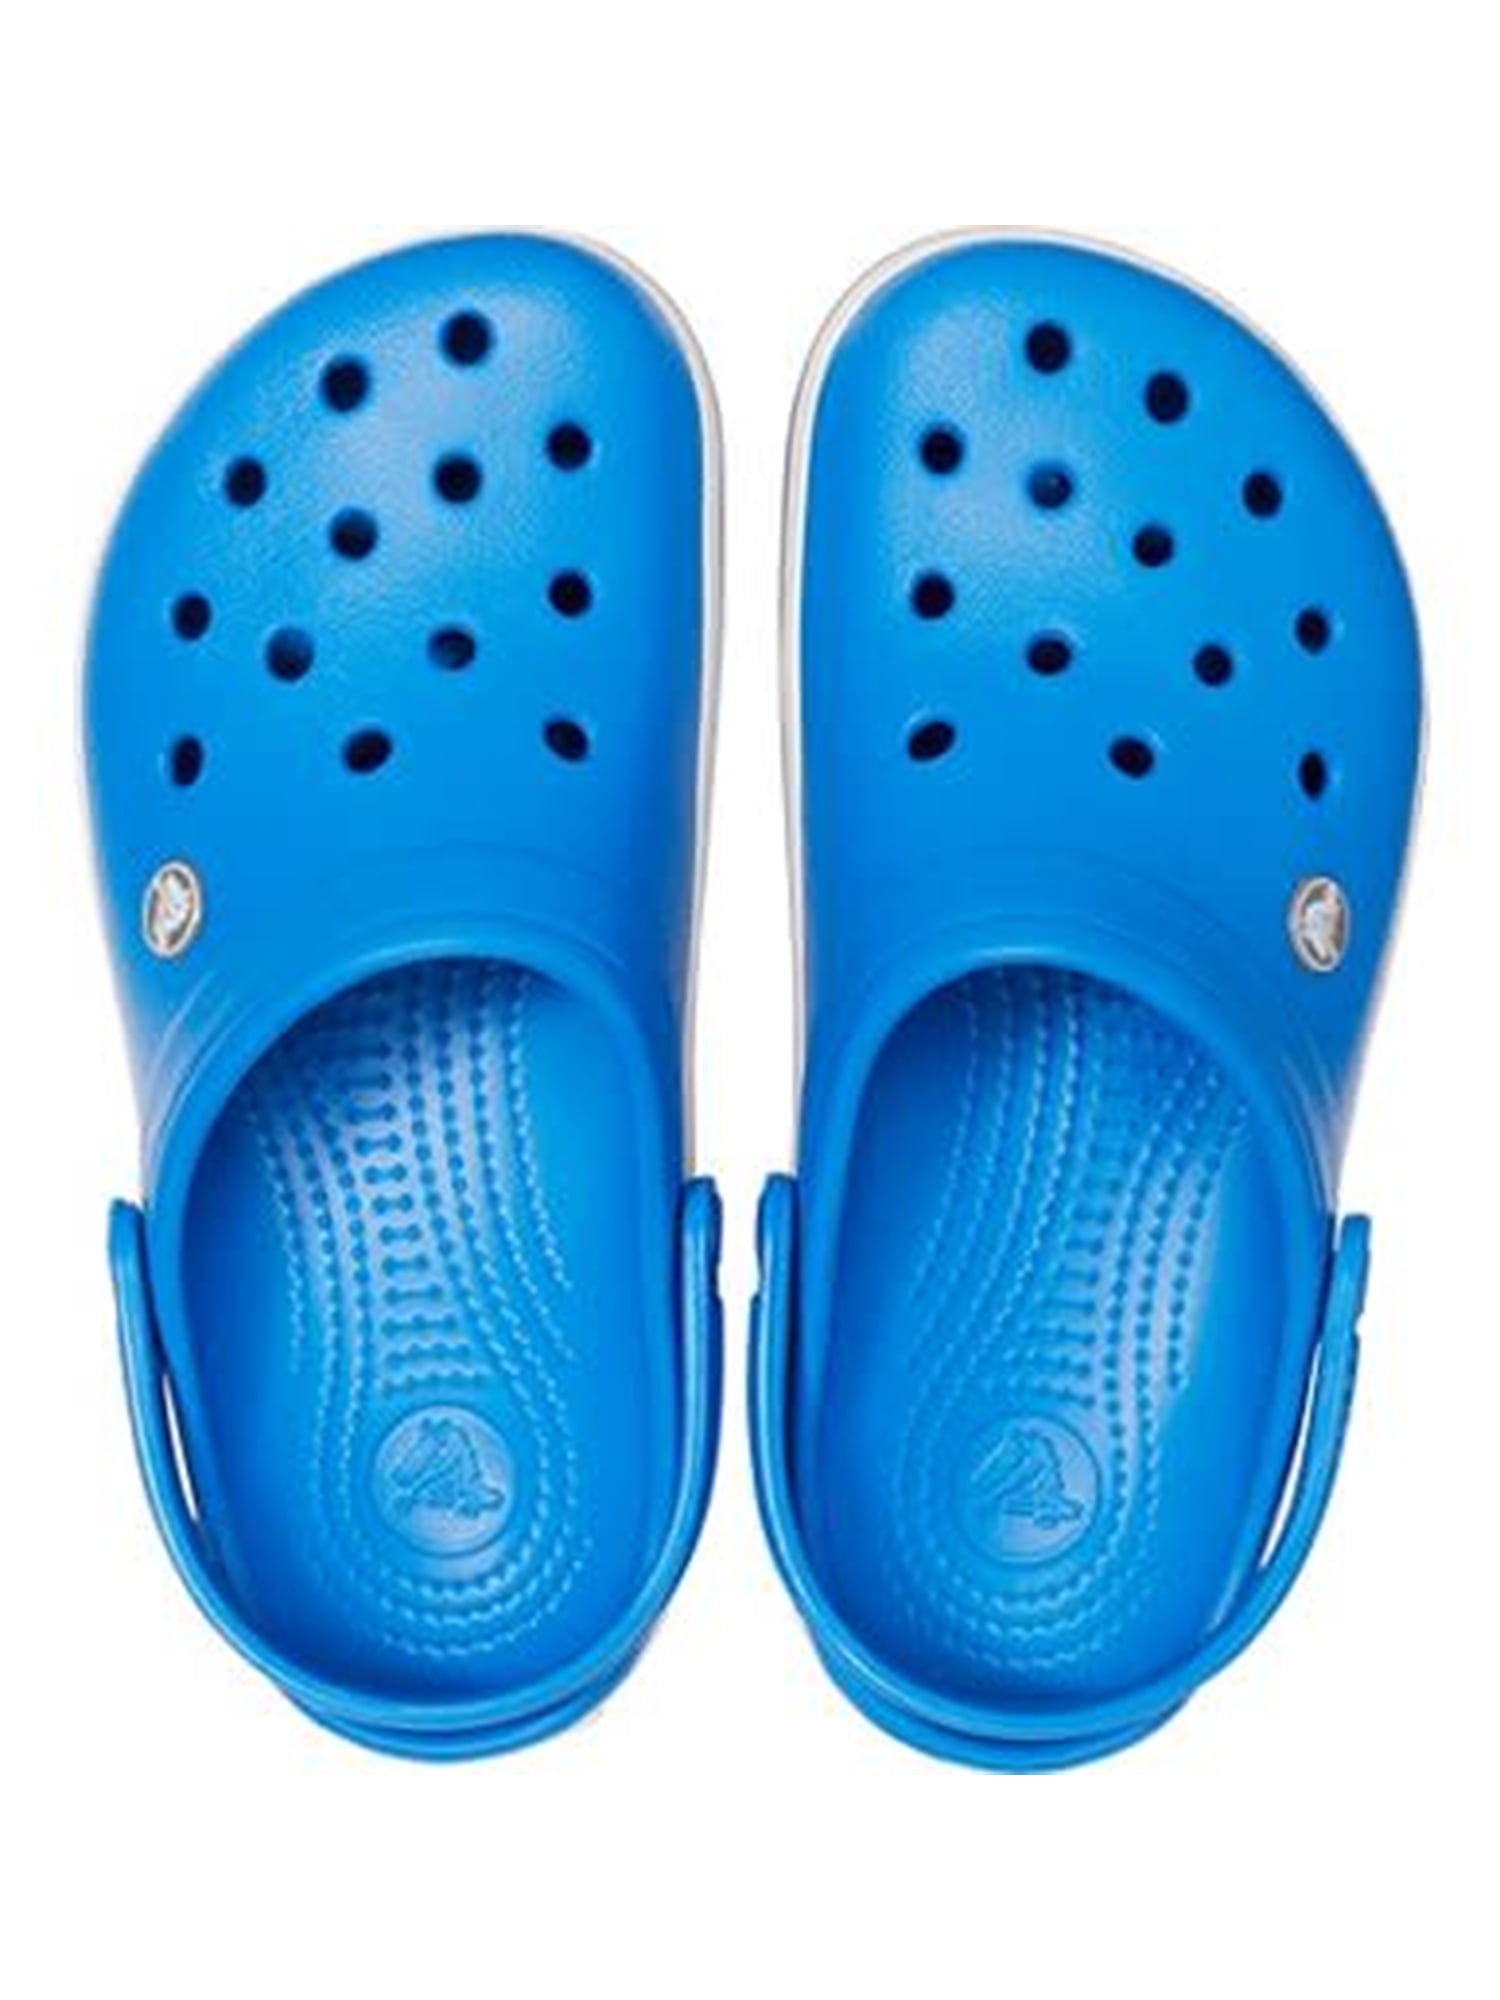 Crocs Crocband Wavy Band Clogs Relaxed Fit Sandals Shoes in Black & Blue 